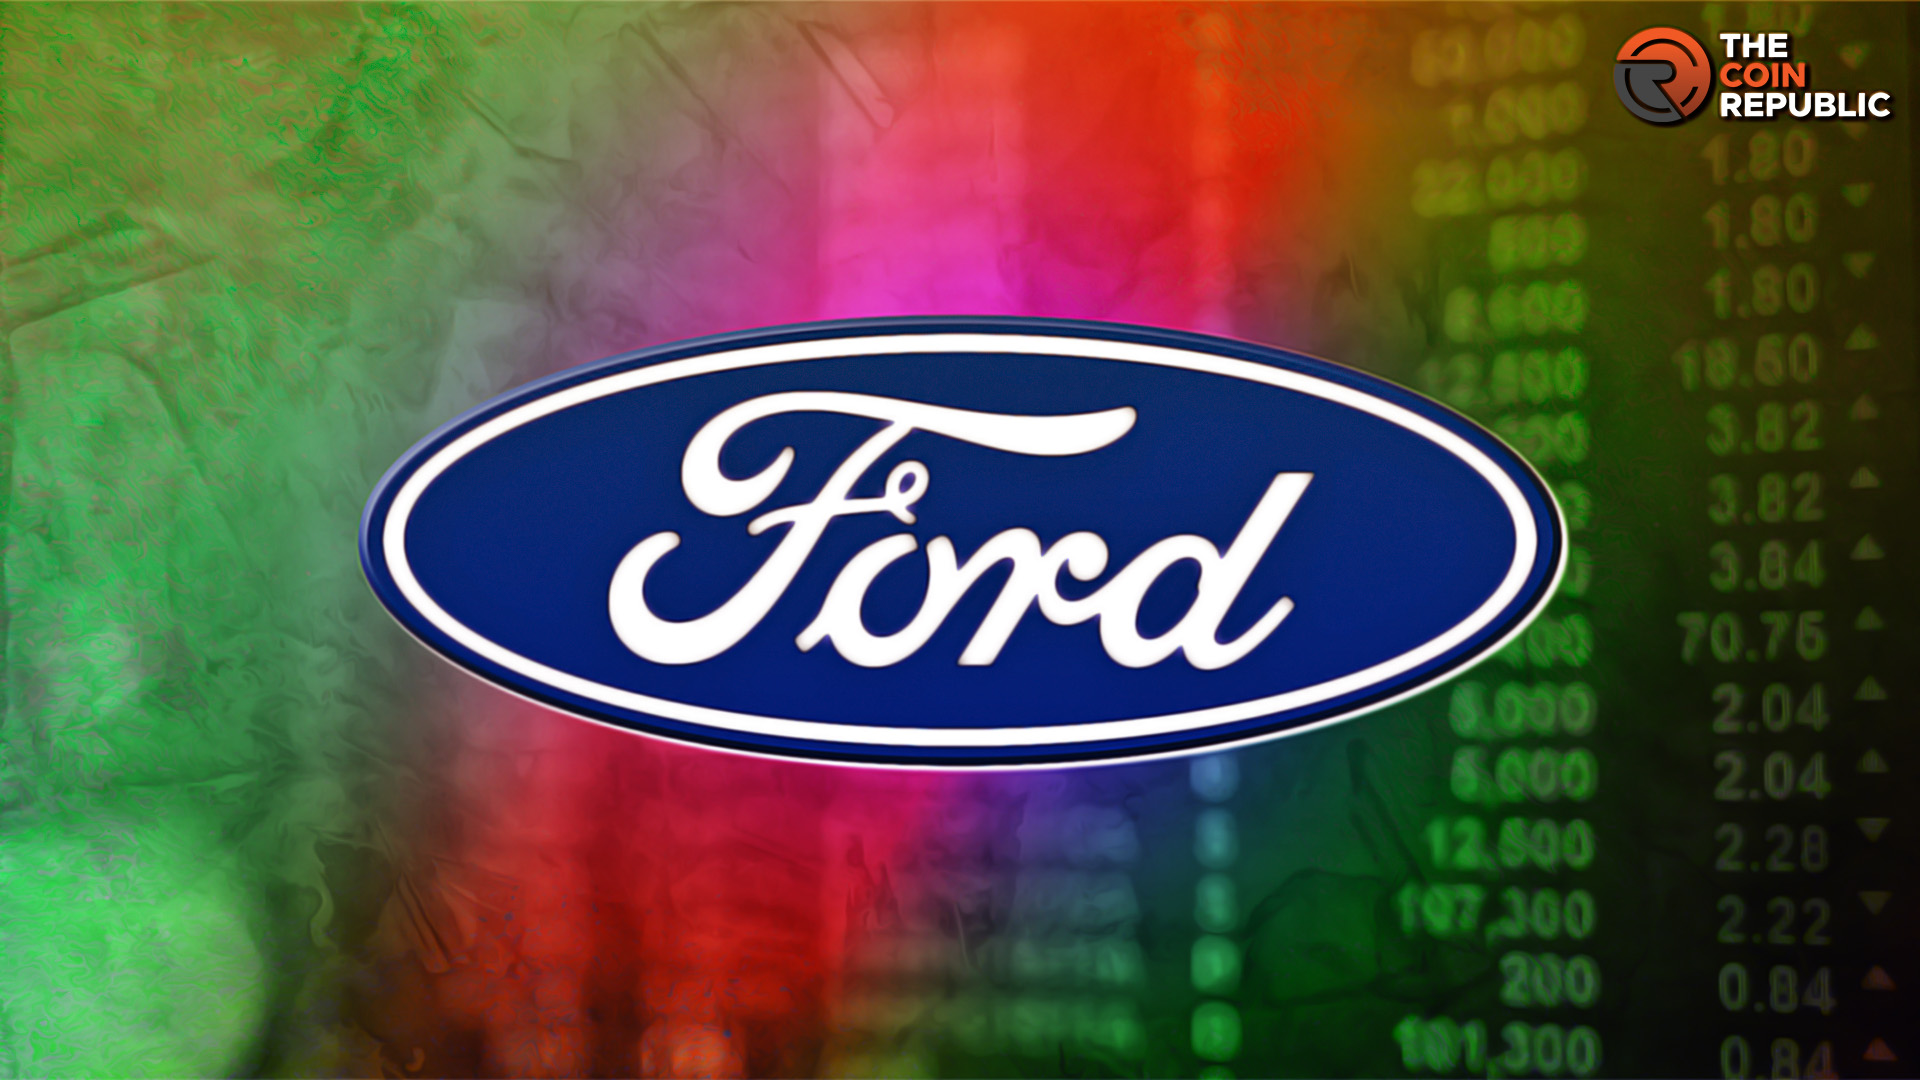 FORD Stock Price Forecast: Will F Stock Attain $15 Level?